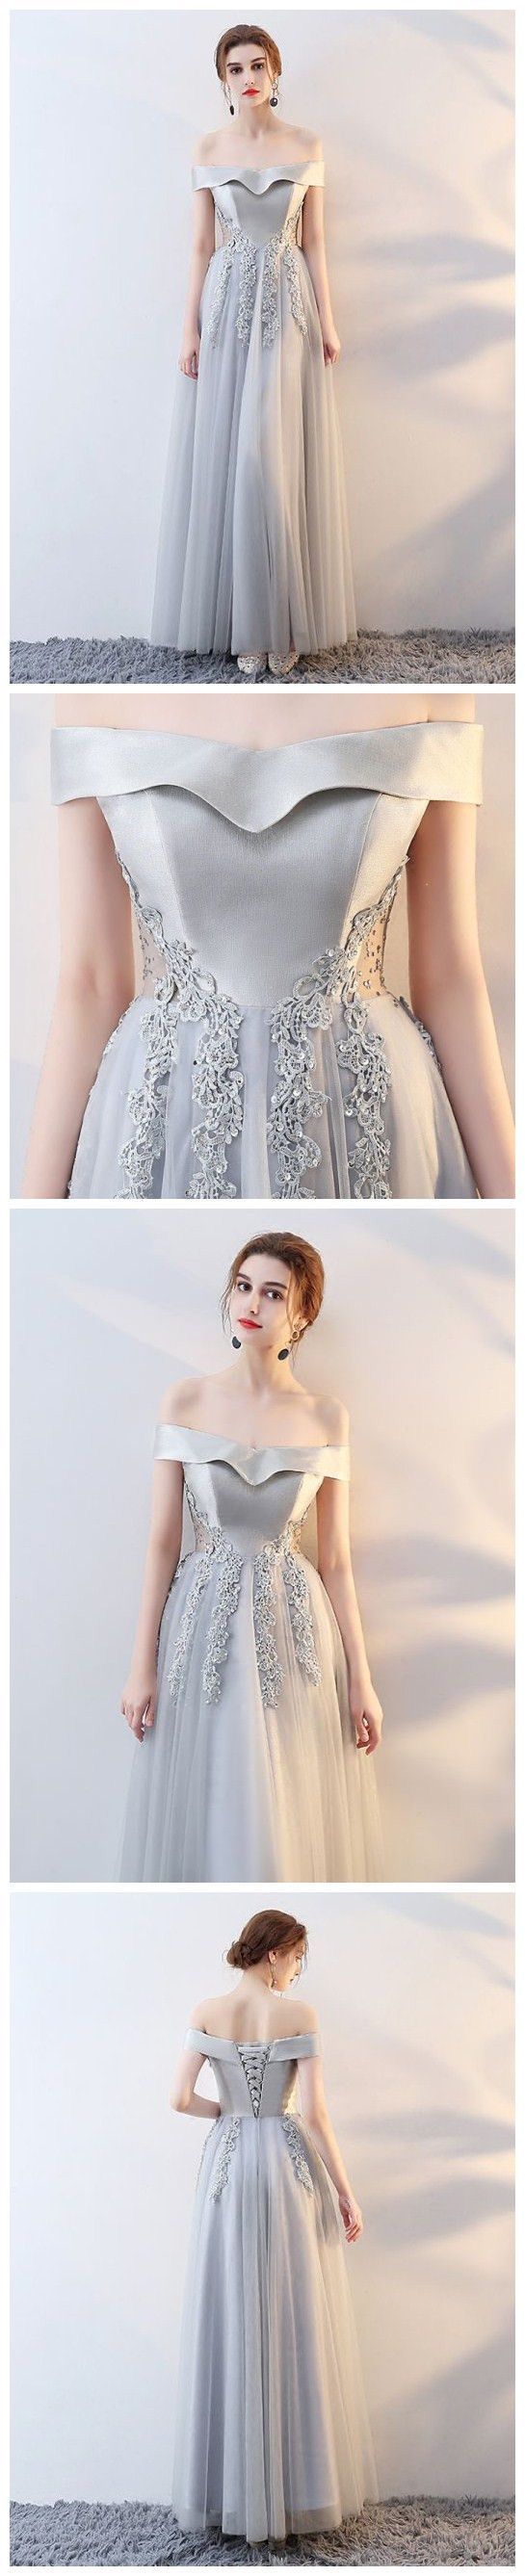 Charming Silver Gray Prom Dress, Long Prom Dresses, Off The Shoulder Evening Dress M1786